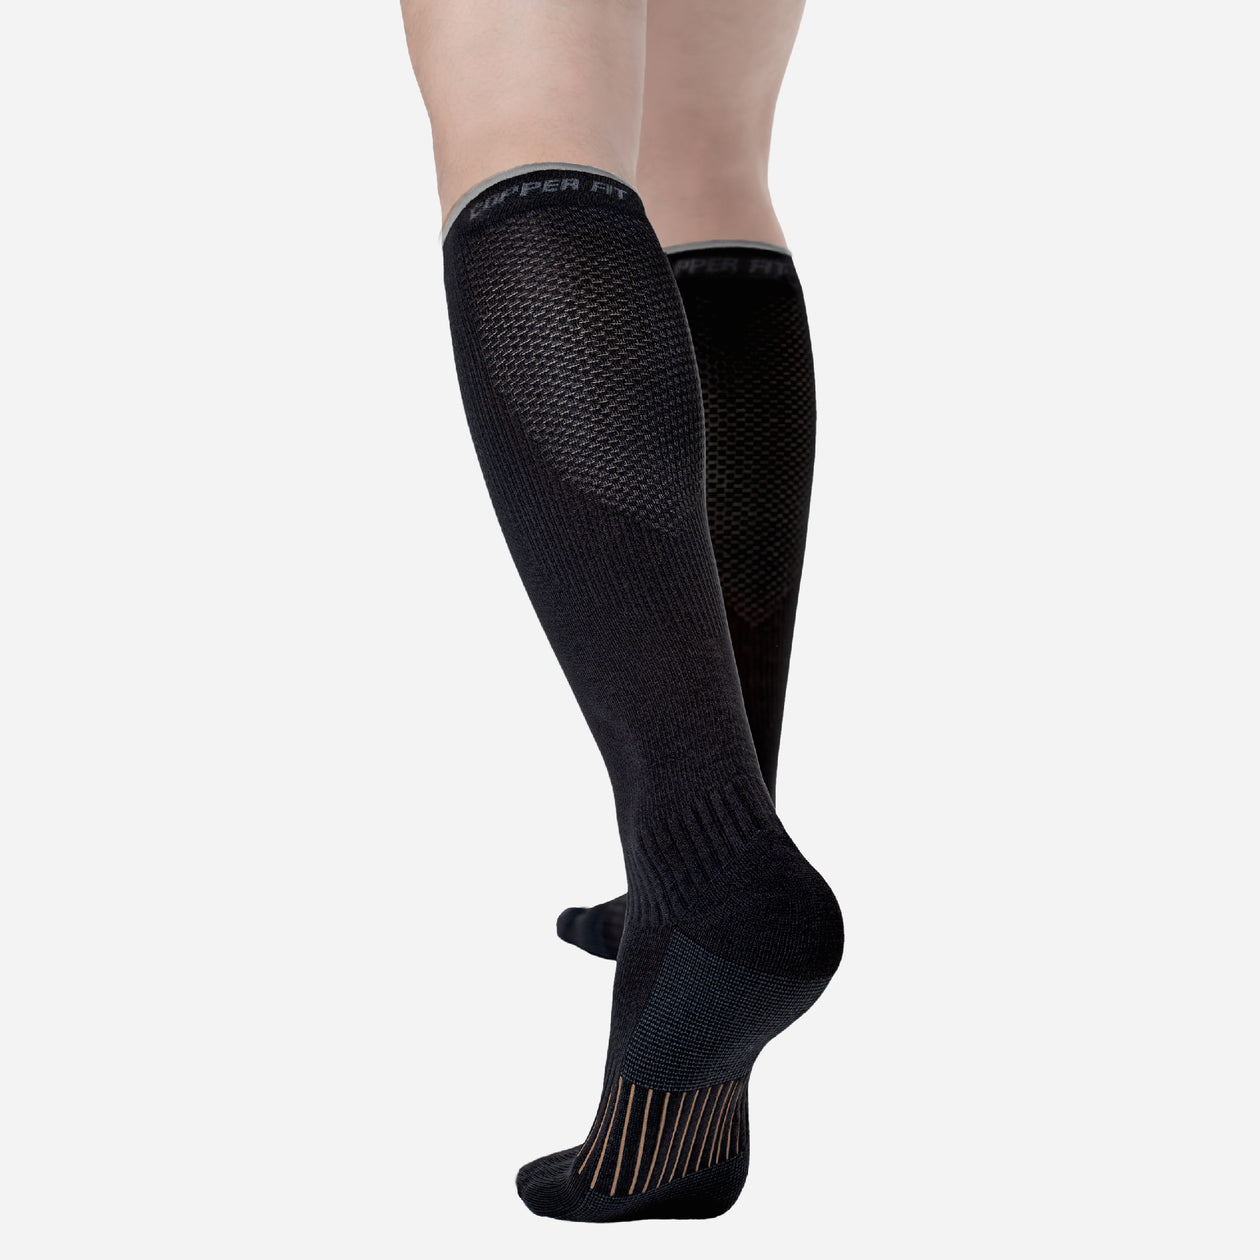 White Fishnet Stockings With Heart Pattern + Solid Leg Calf